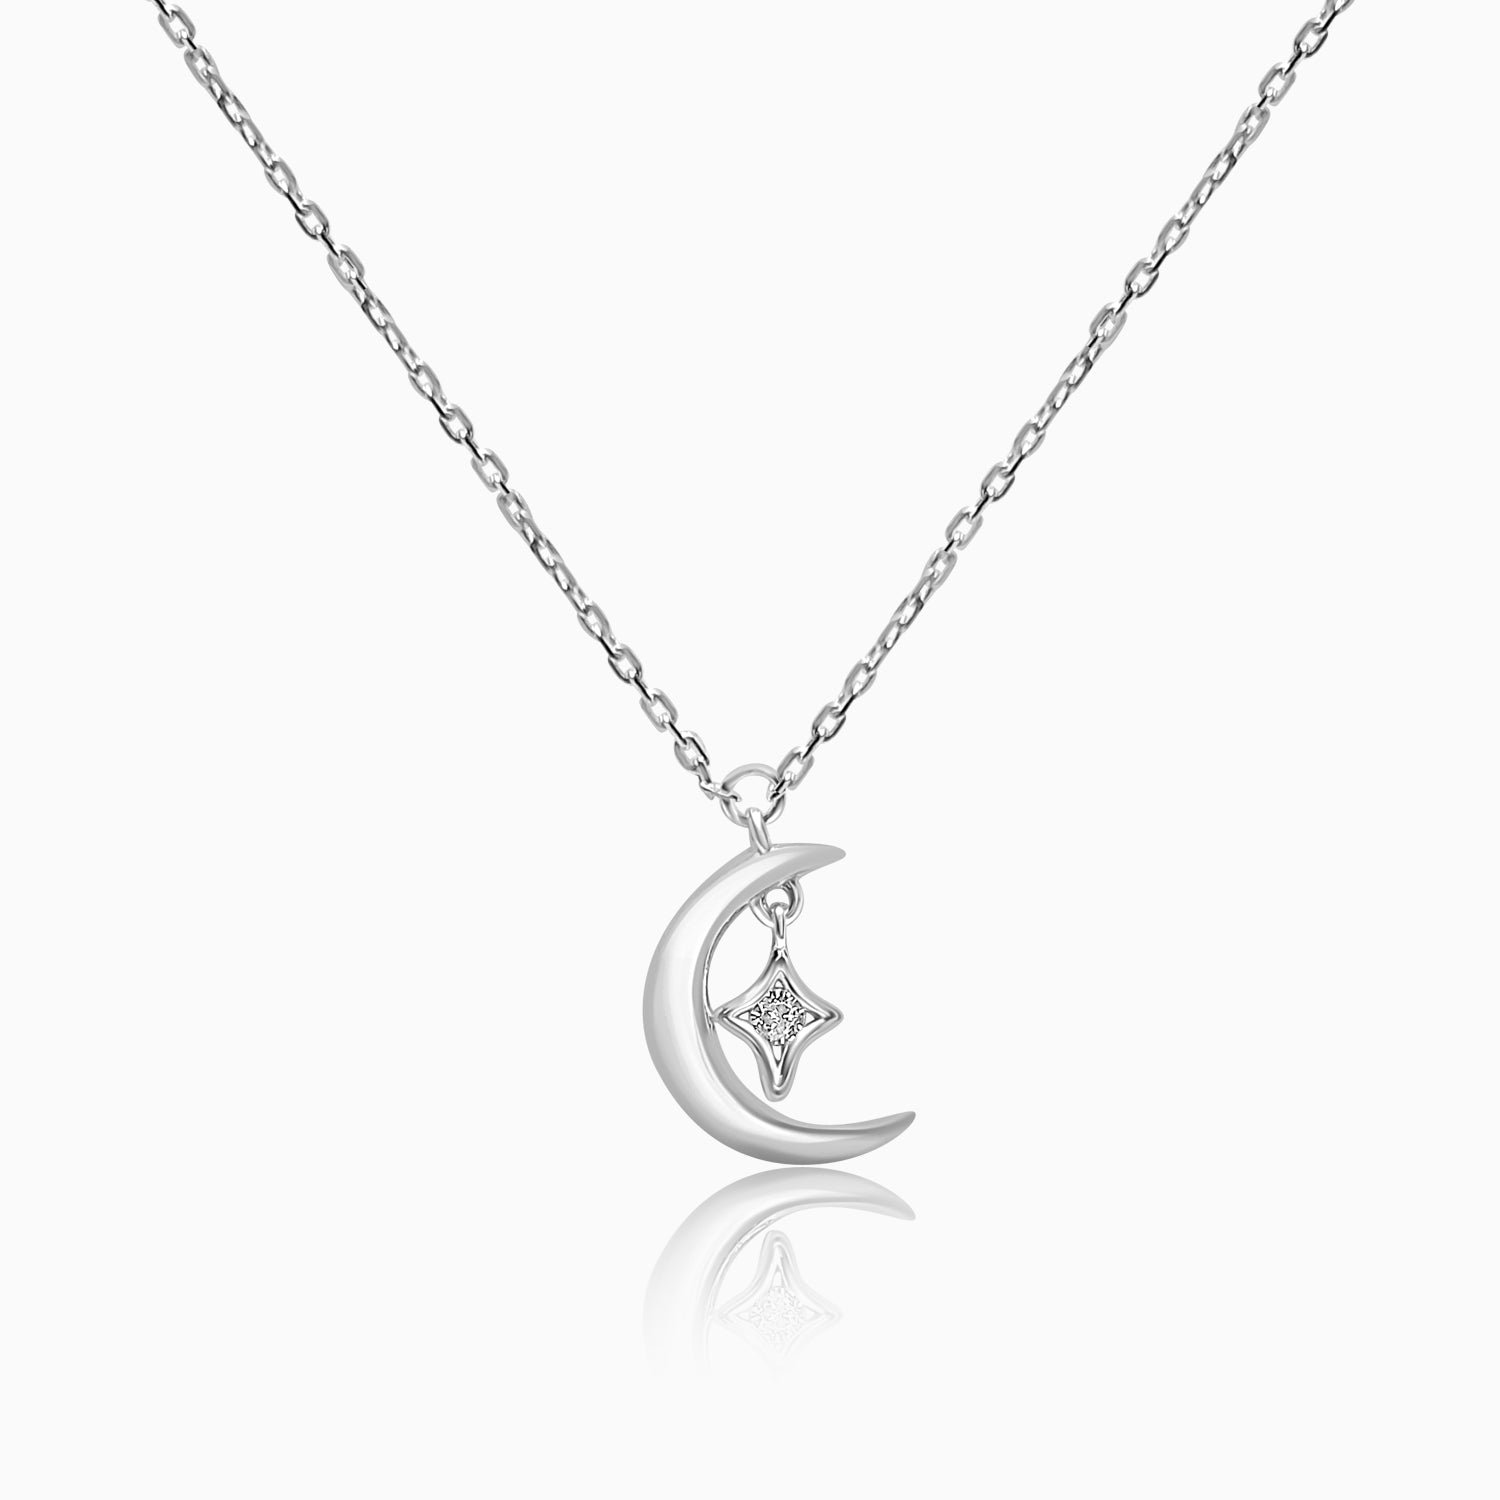 Silver Dangling Moon Star Necklace